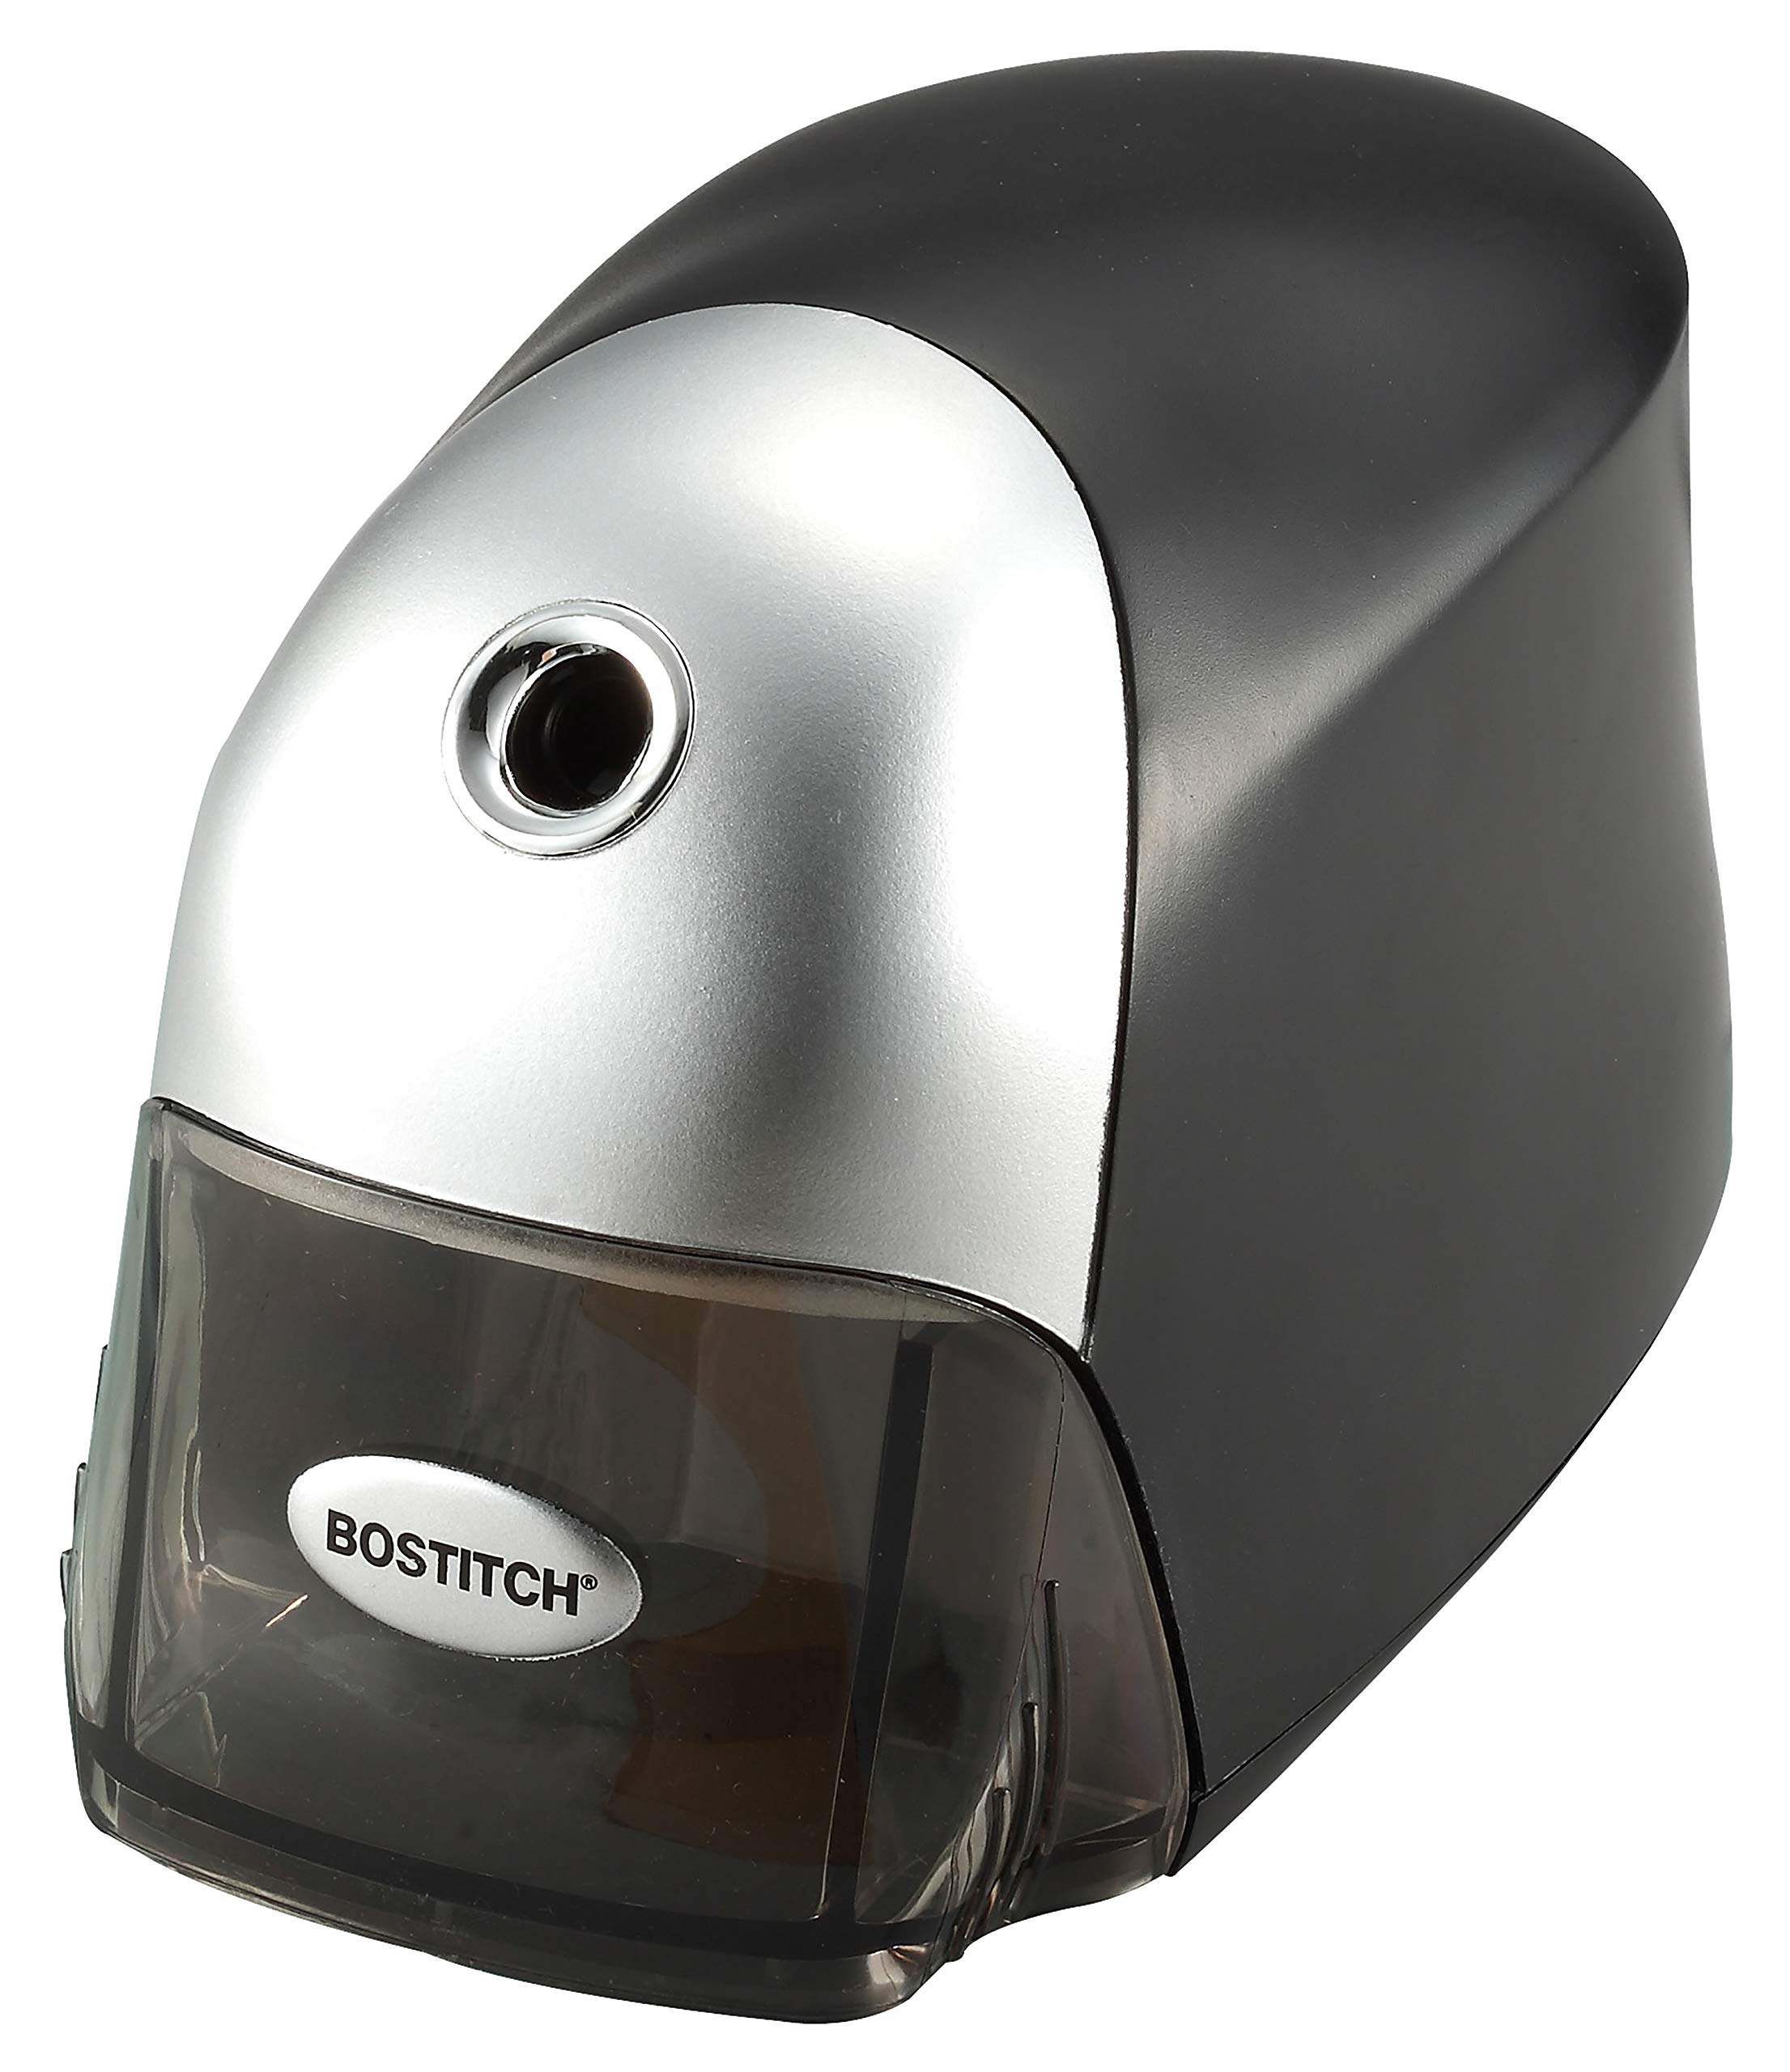 Bostitch Office QuietSharp Executive Heavy Duty Electric Pencil Sharpener for 65% Faster Sharpening and 6x Longer Cutter Life - Colored Pencil Compatible, Black